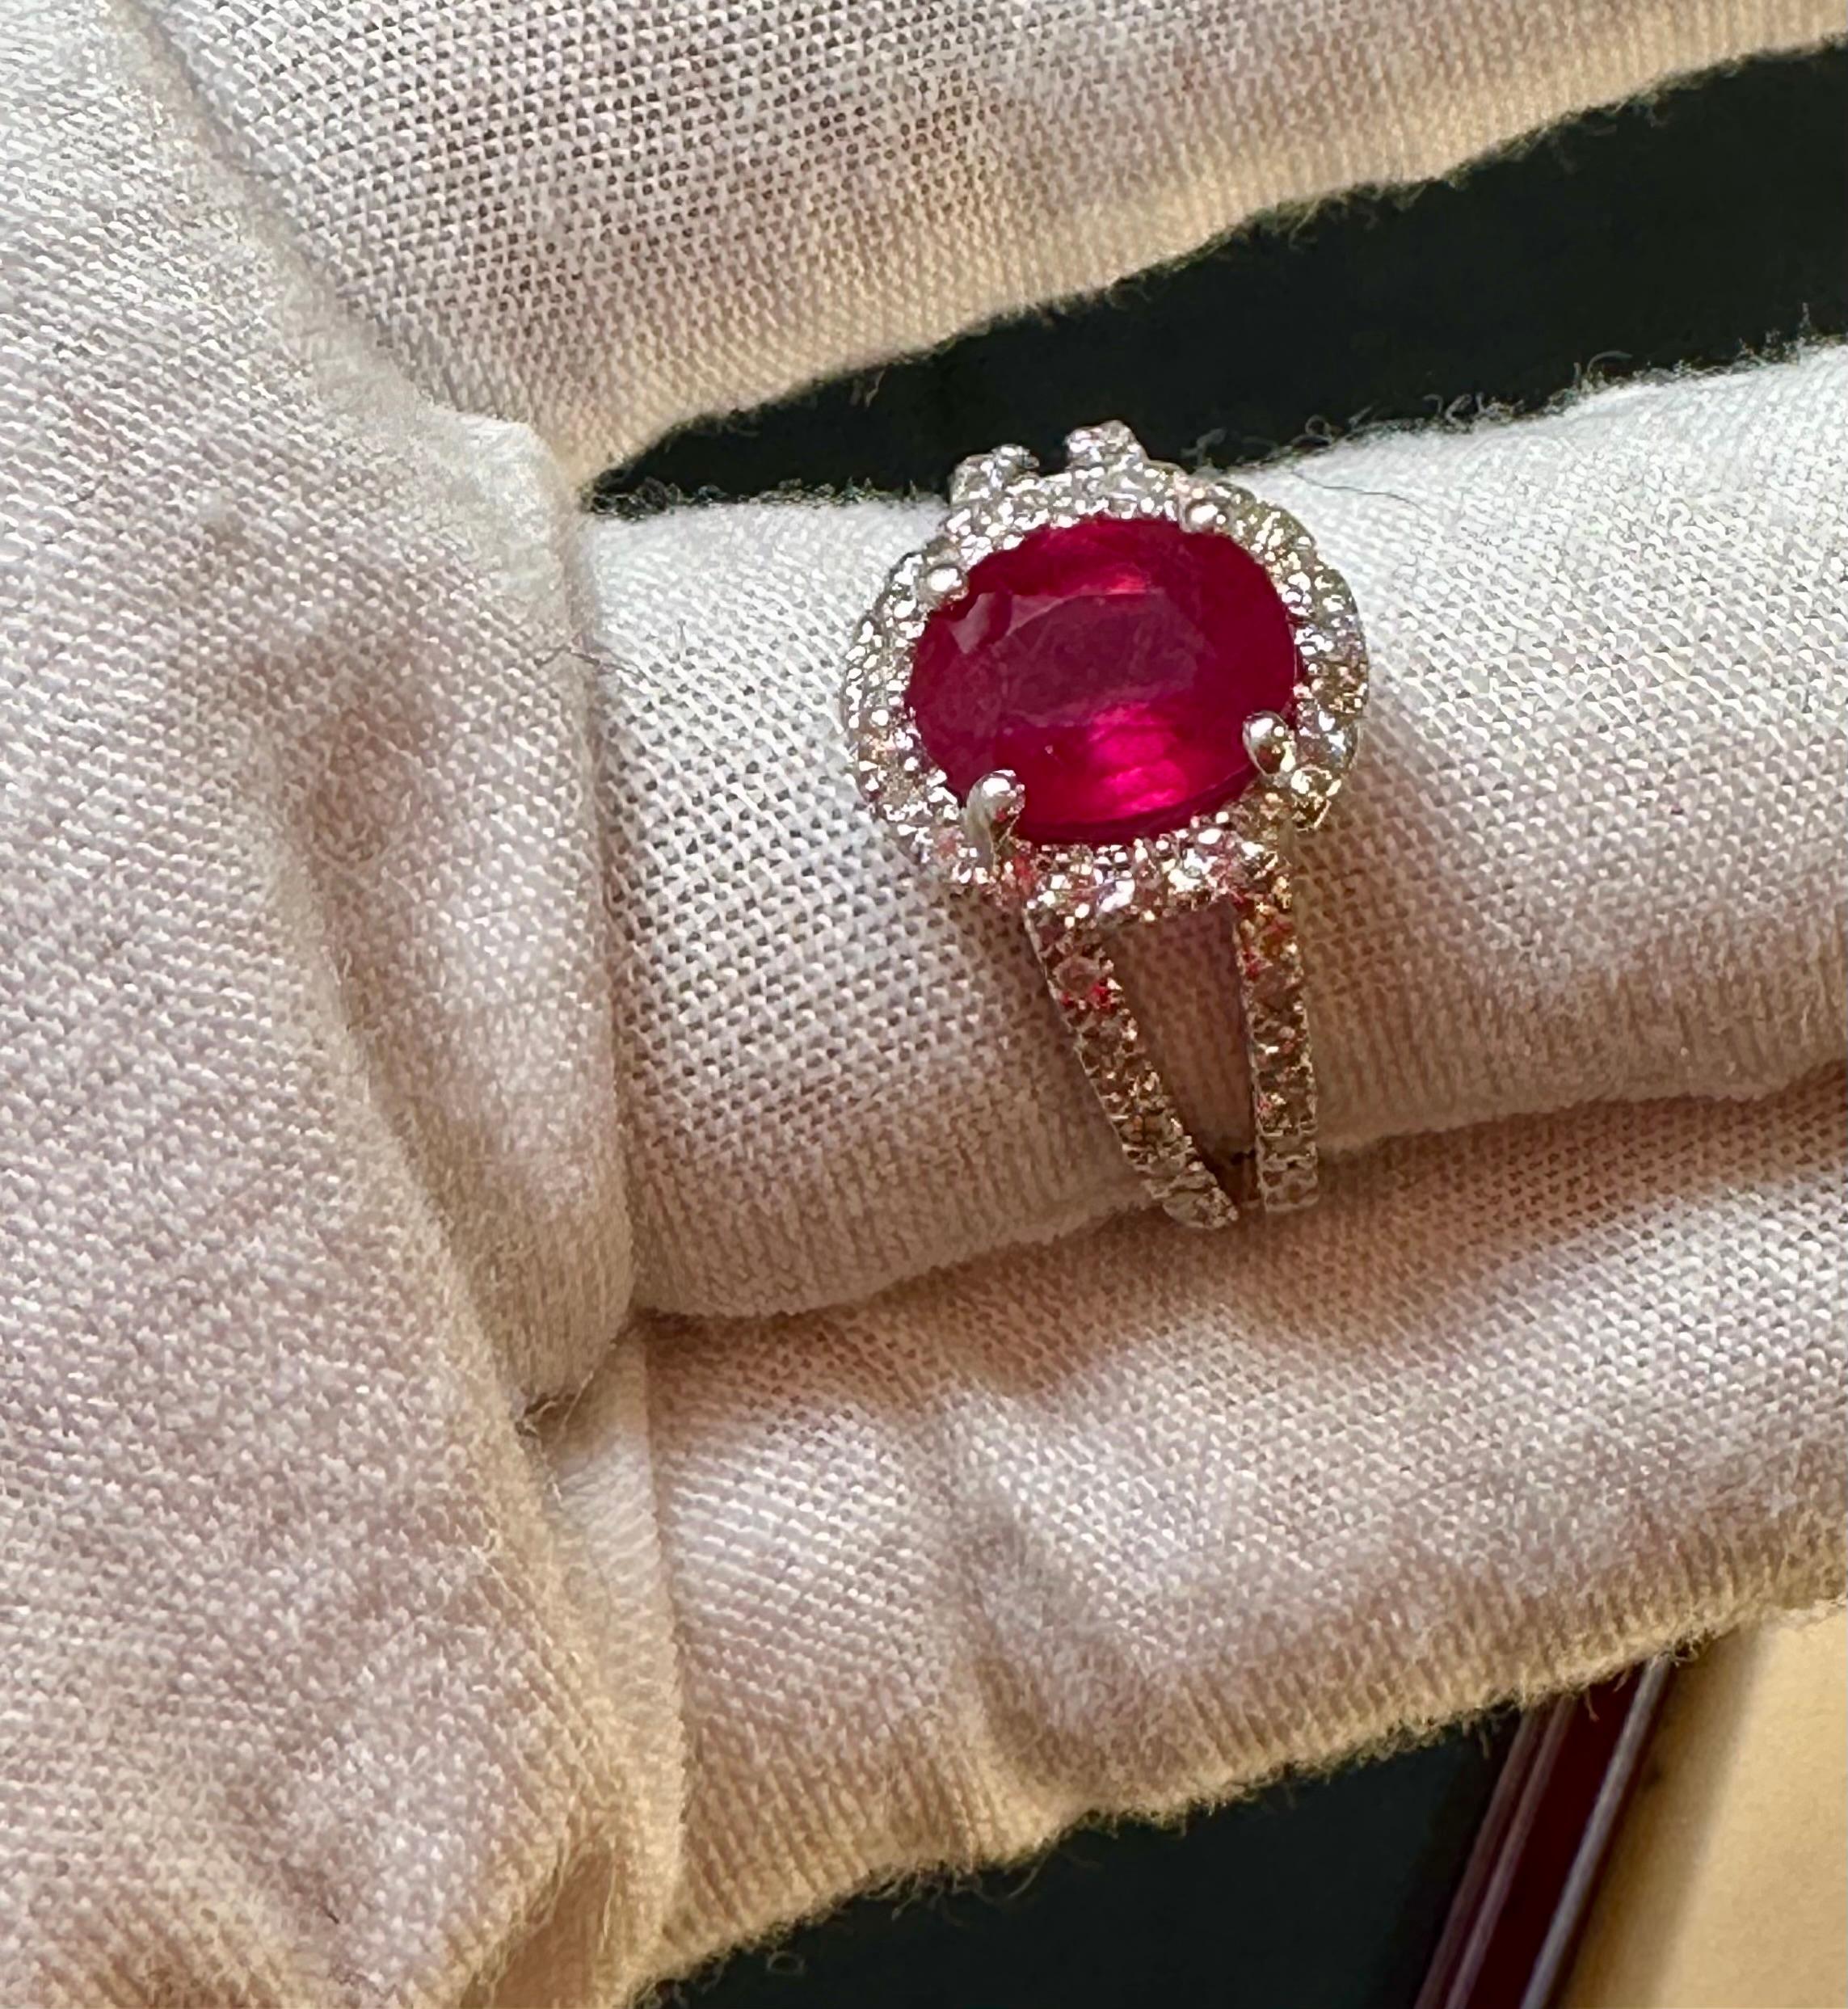 2.5 Carat Oval Treated Ruby & 2 ct Diamond Ring 14 Karat White Gold Size 7.25 For Sale 1